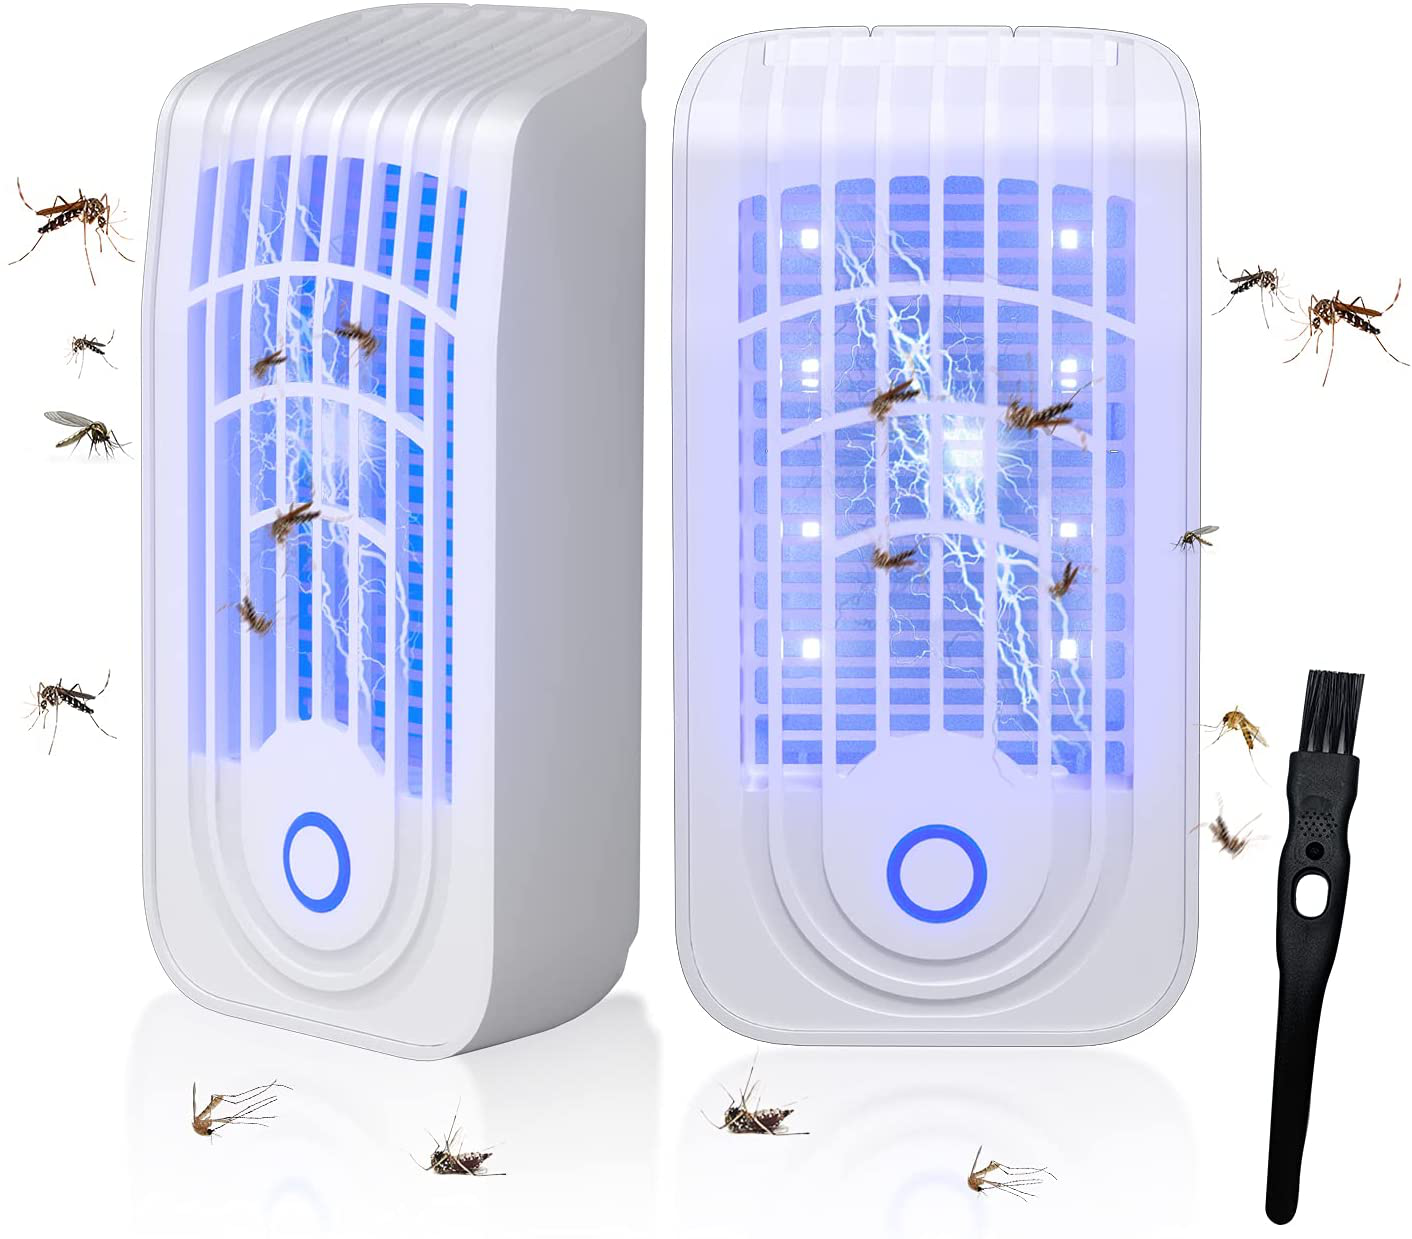 BOYON Bug Zapper, 2 Packs Indoor Plug-in Mosquitos Insects, Electronic Mosquito Killer Indoor Fruit Fly Traps with LED Light for Home， Kitchen， Bedroom, Office (White)